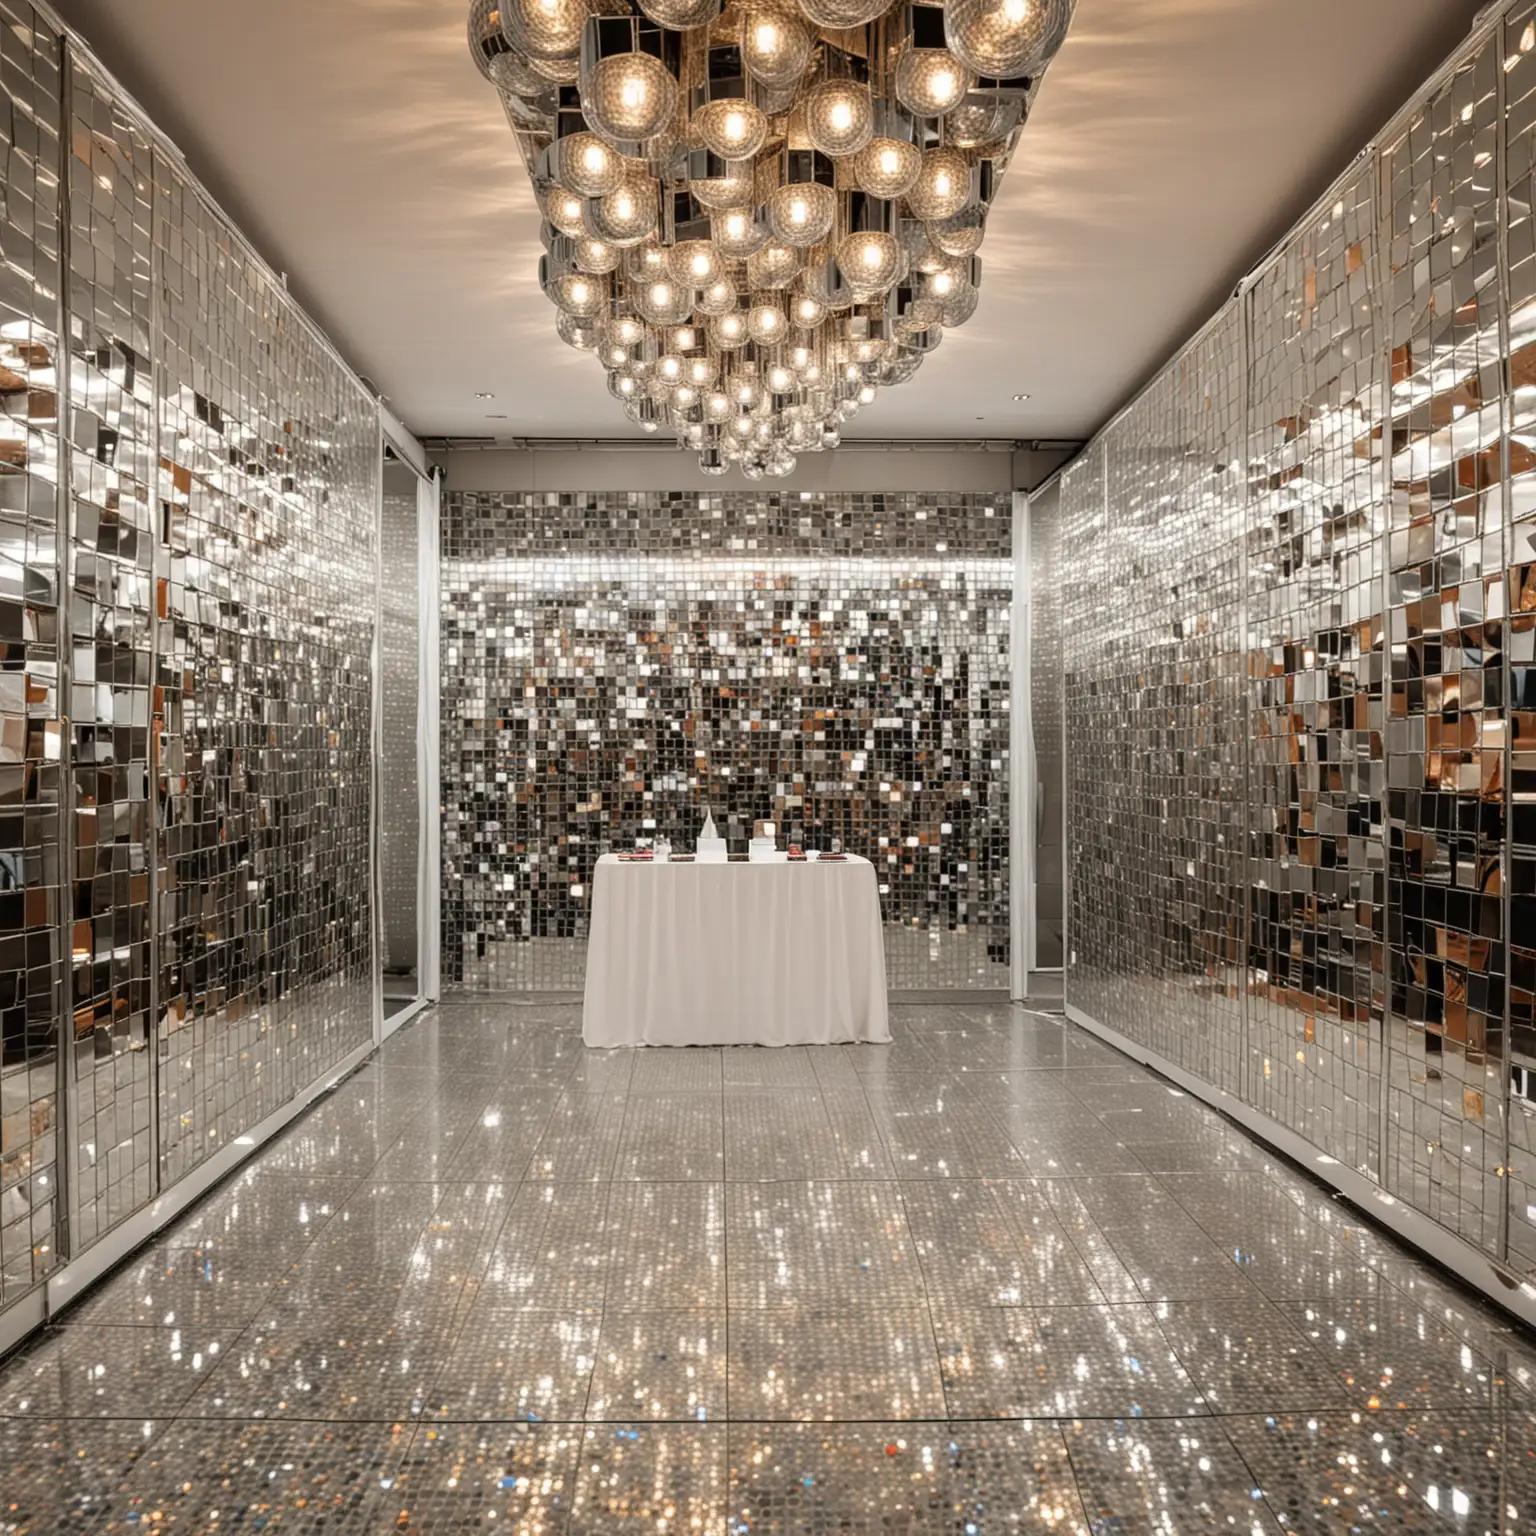 A CUBE photobooth with a variety of large disco balls hanging down from the ceiling and mirror mosaic walls and mirror mosaic floor